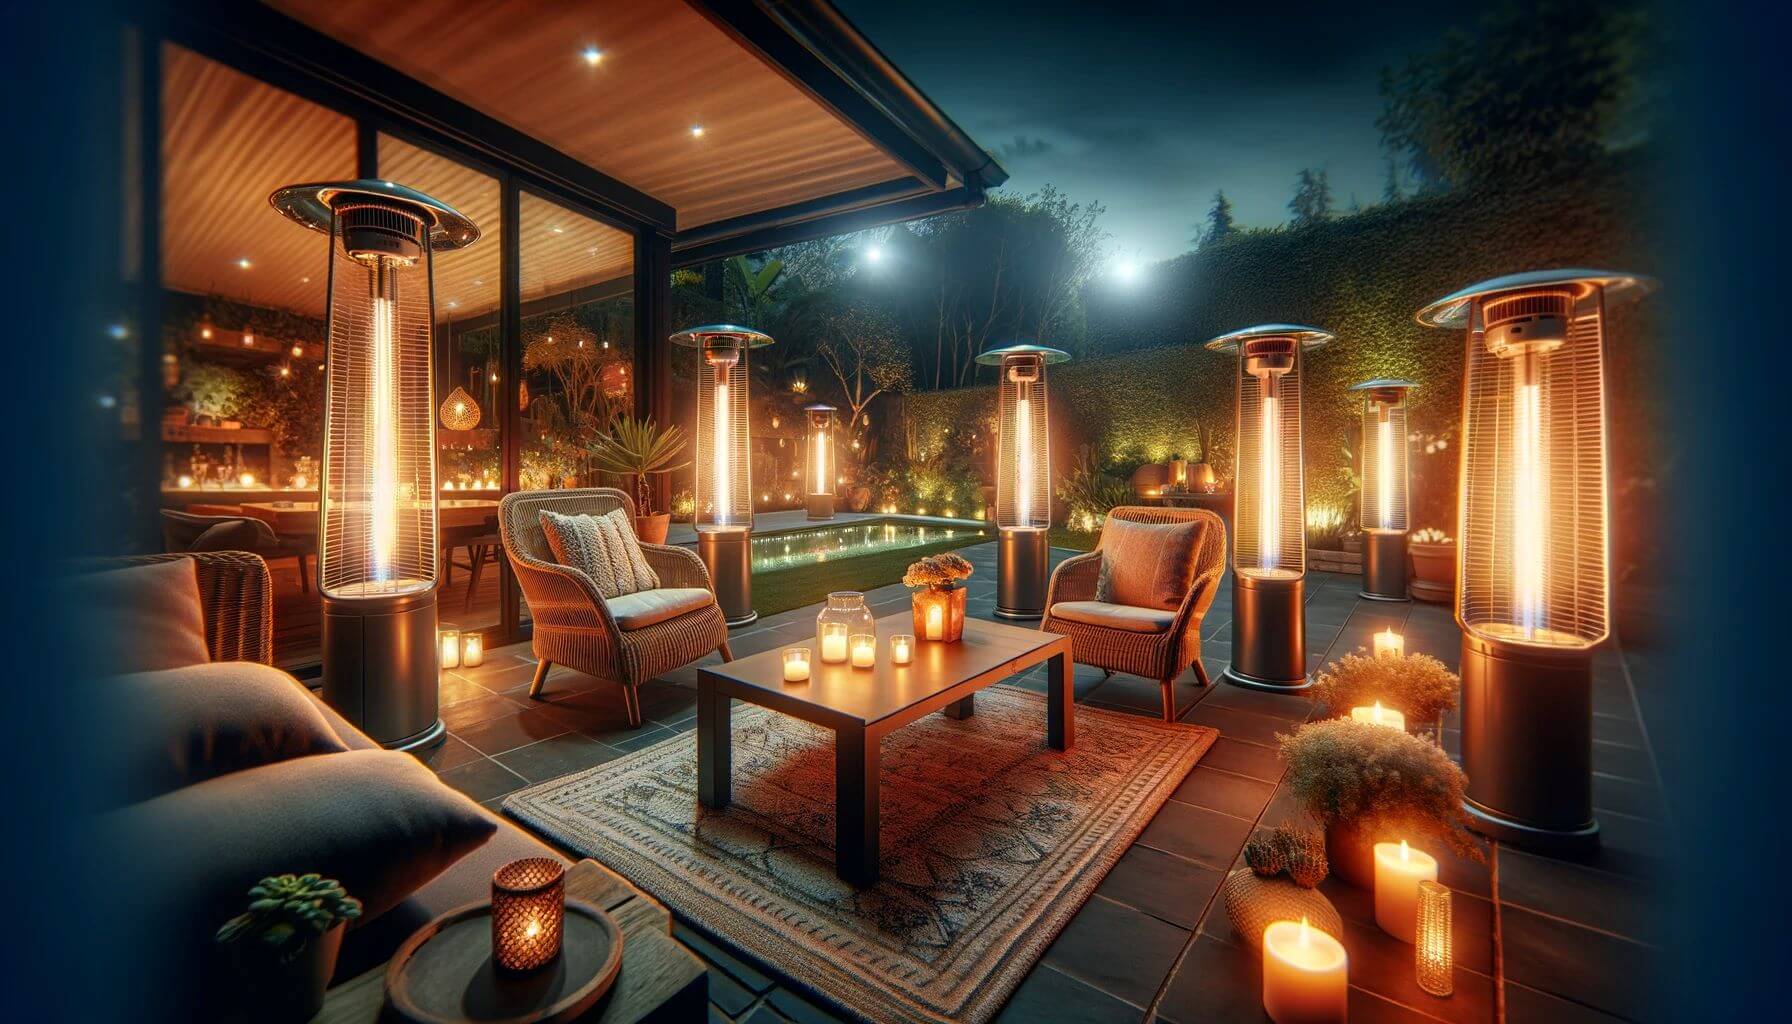 Patio set up with infrared heater to enhance patios space